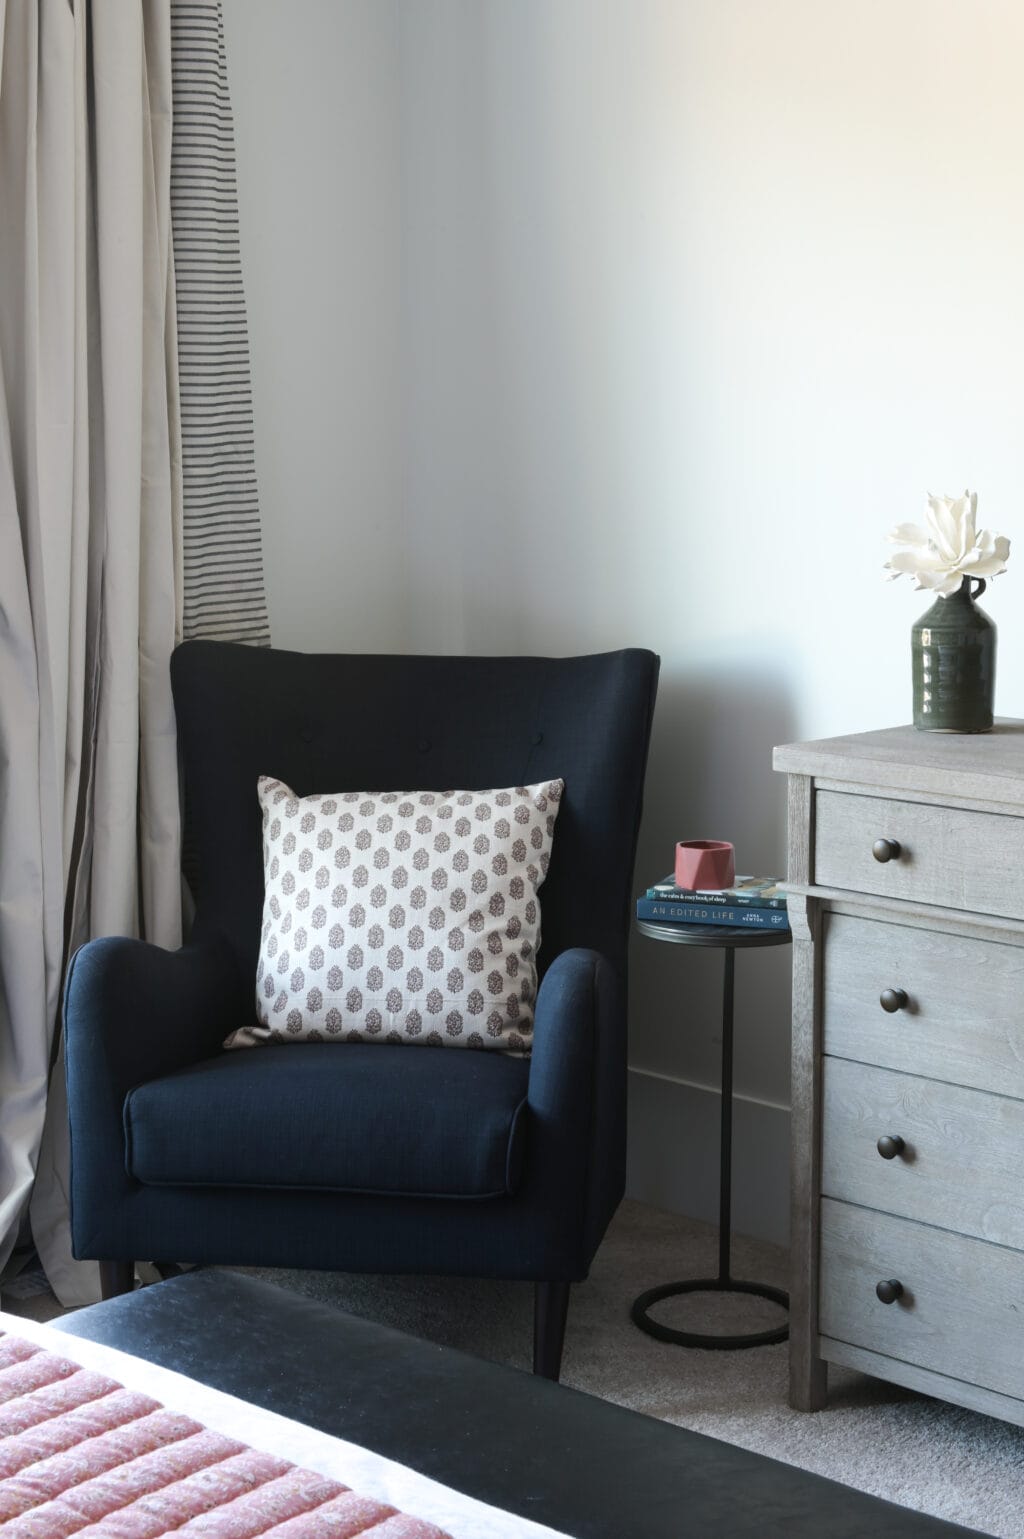 Adding a wingback chair to a bedroom